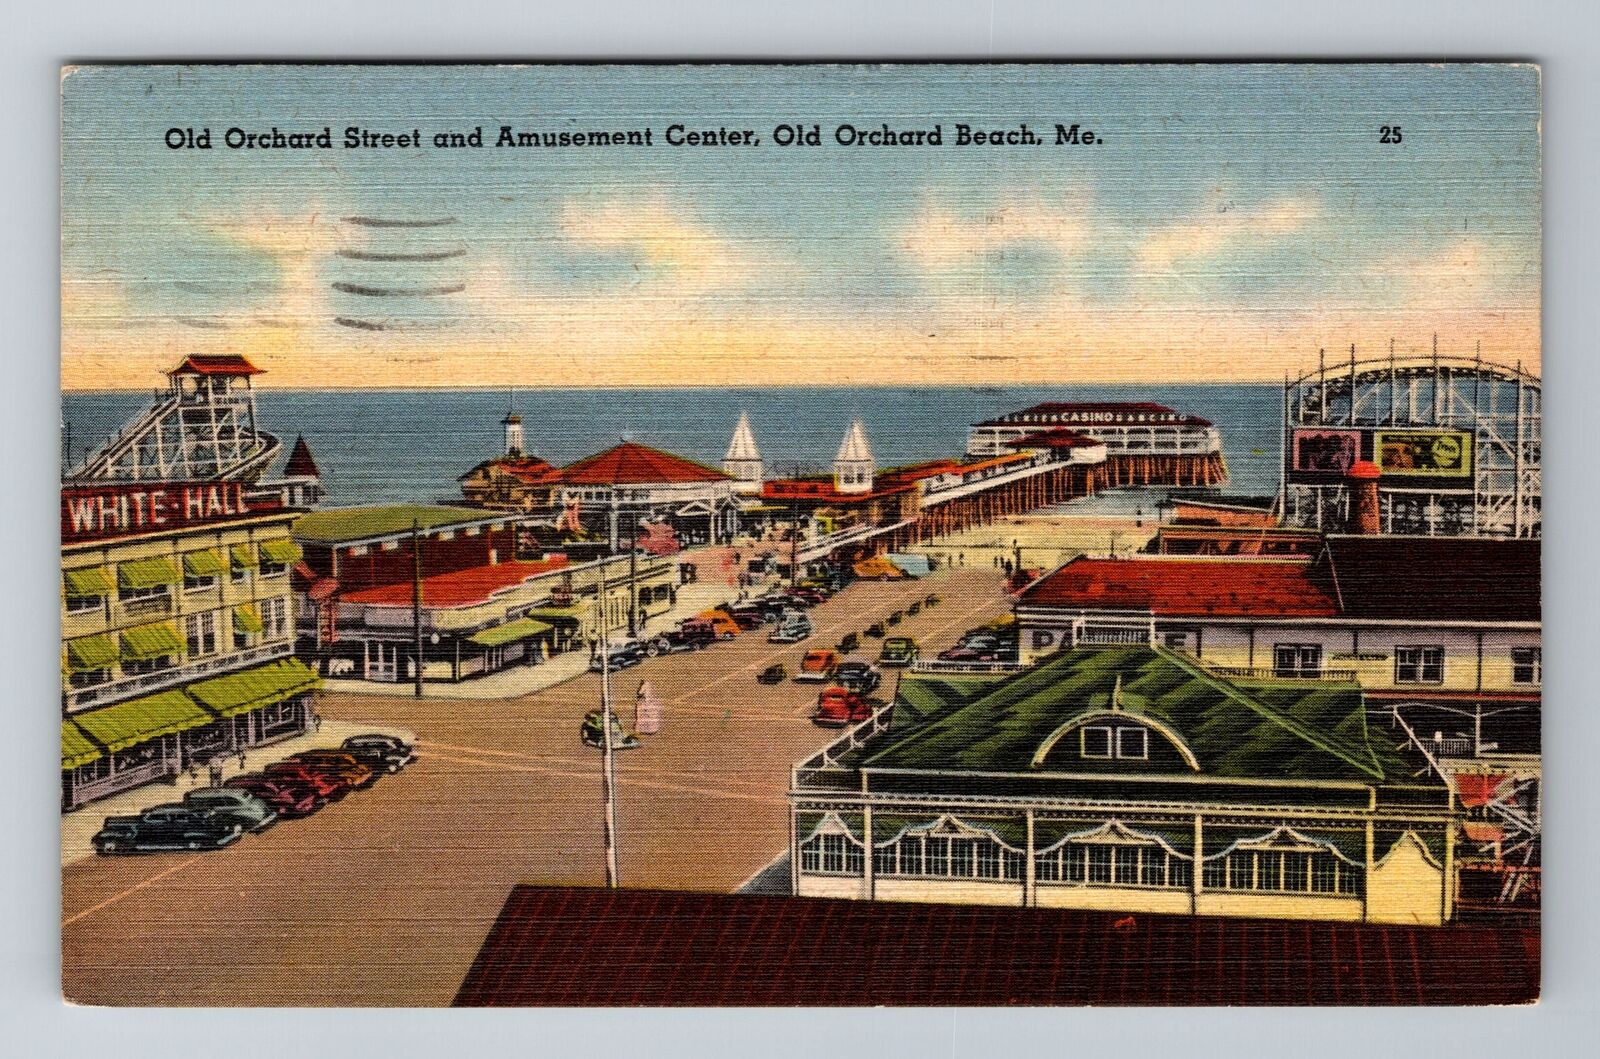 Old Orchard Beach ME-Maine, Old Orchard Steet, Center, Vintage c1945 Postcard